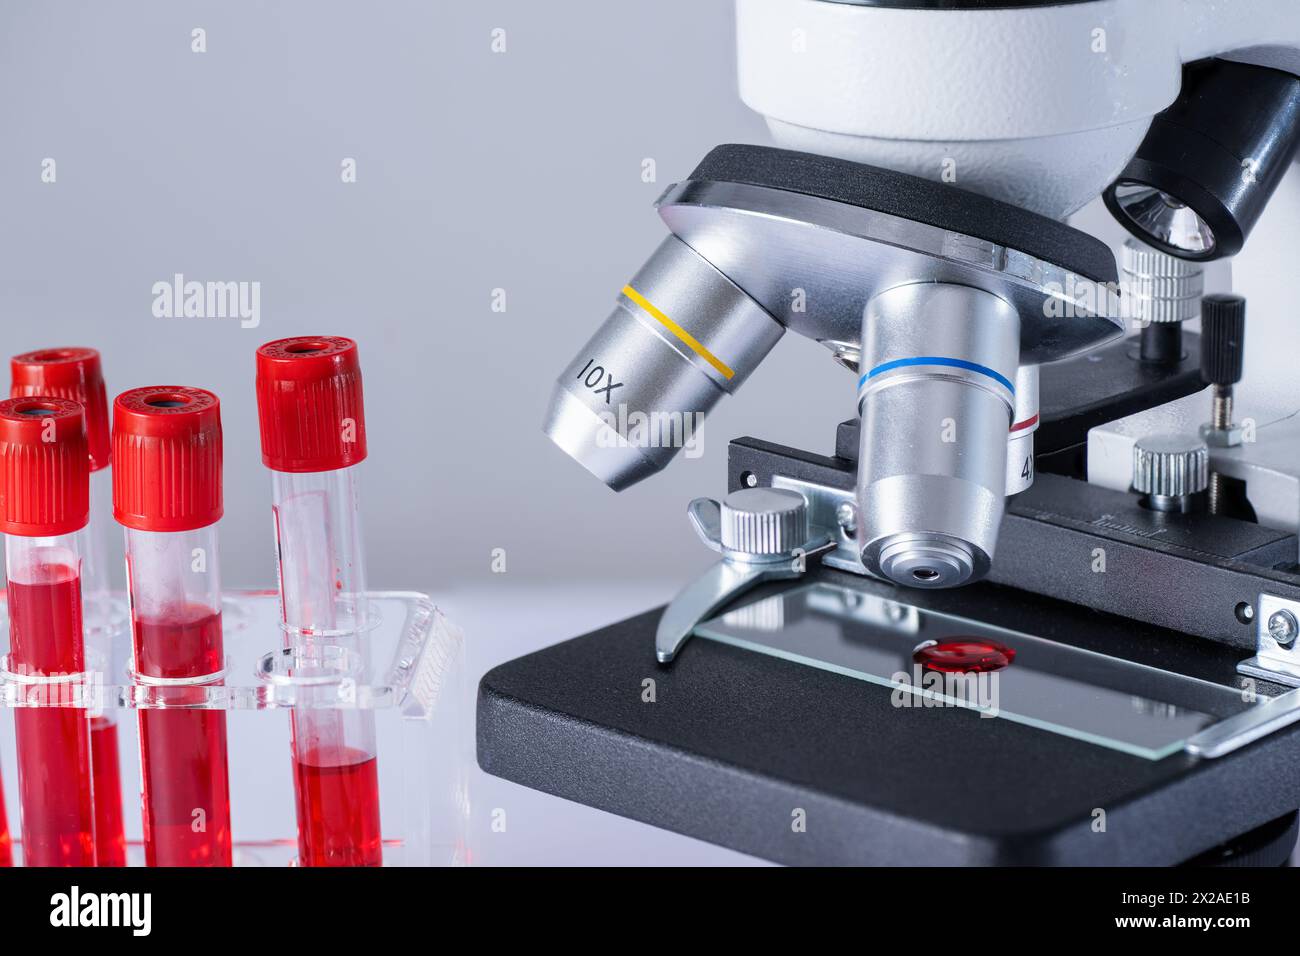 A microscope with a slide containing red blood cells. Microscope is on a laboratory table next to a few red blood cell tubes. Stock Photo